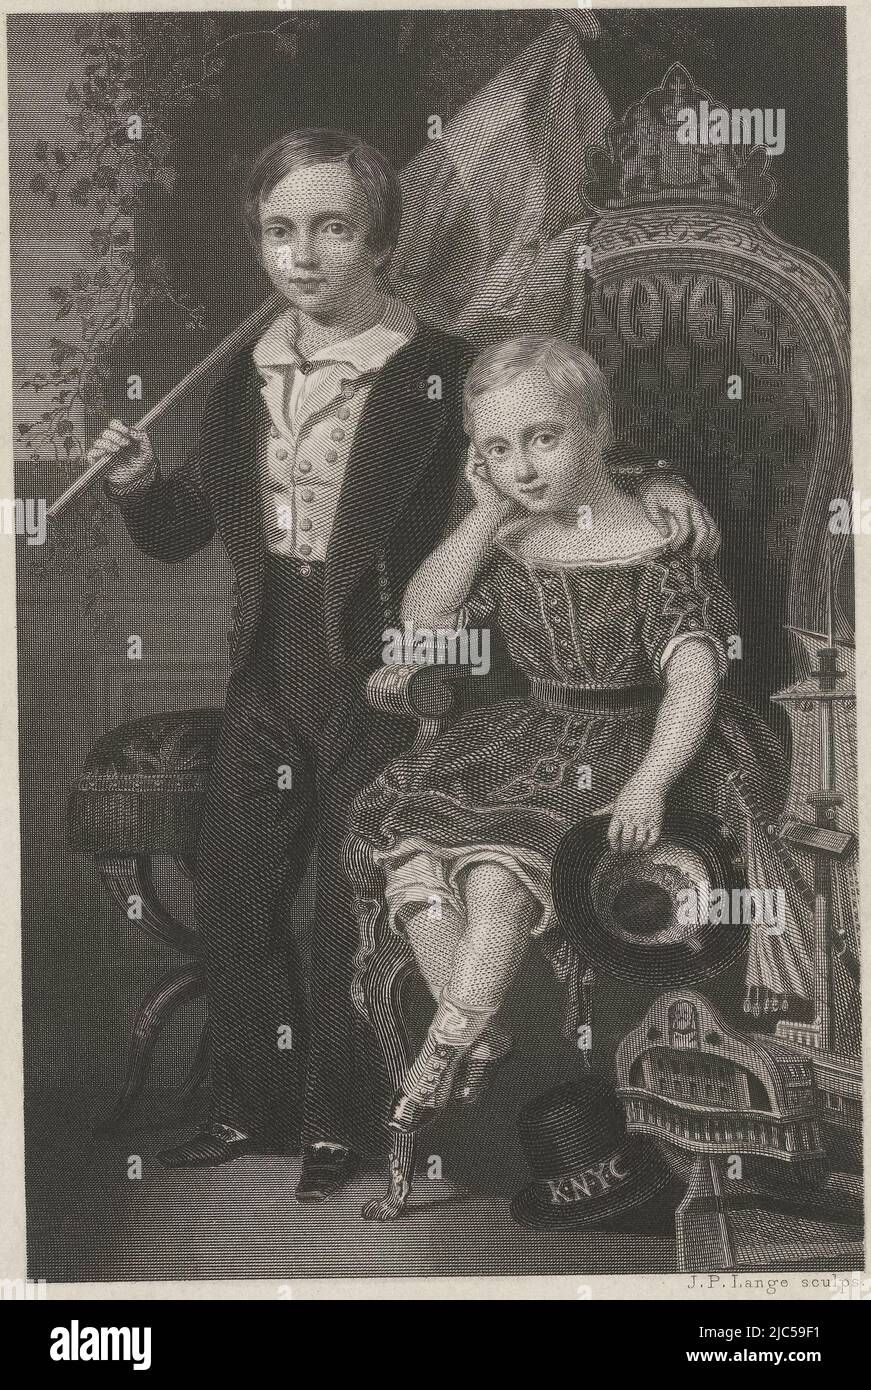 Double portrait of the children William of Orange, crown prince of the Netherlands, and Prince Maurice of Orange-Nassau. Prince William of Orange is standing with the Dutch flag in his hands and has an arm around Prince Maurice's shoulders. The latter is seated with hat in hand on a chair crowned with an escutcheon, Double portrait of William of Orange, crown prince of the Netherlands, and Prince Maurice of Orange-Nassau, print maker: Johannes Philippus Lange, (mentioned on object), Nicolaas Pieneman, 1847 - 1849, paper, steel engraving, h 172 mm × w 110 mm Stock Photo